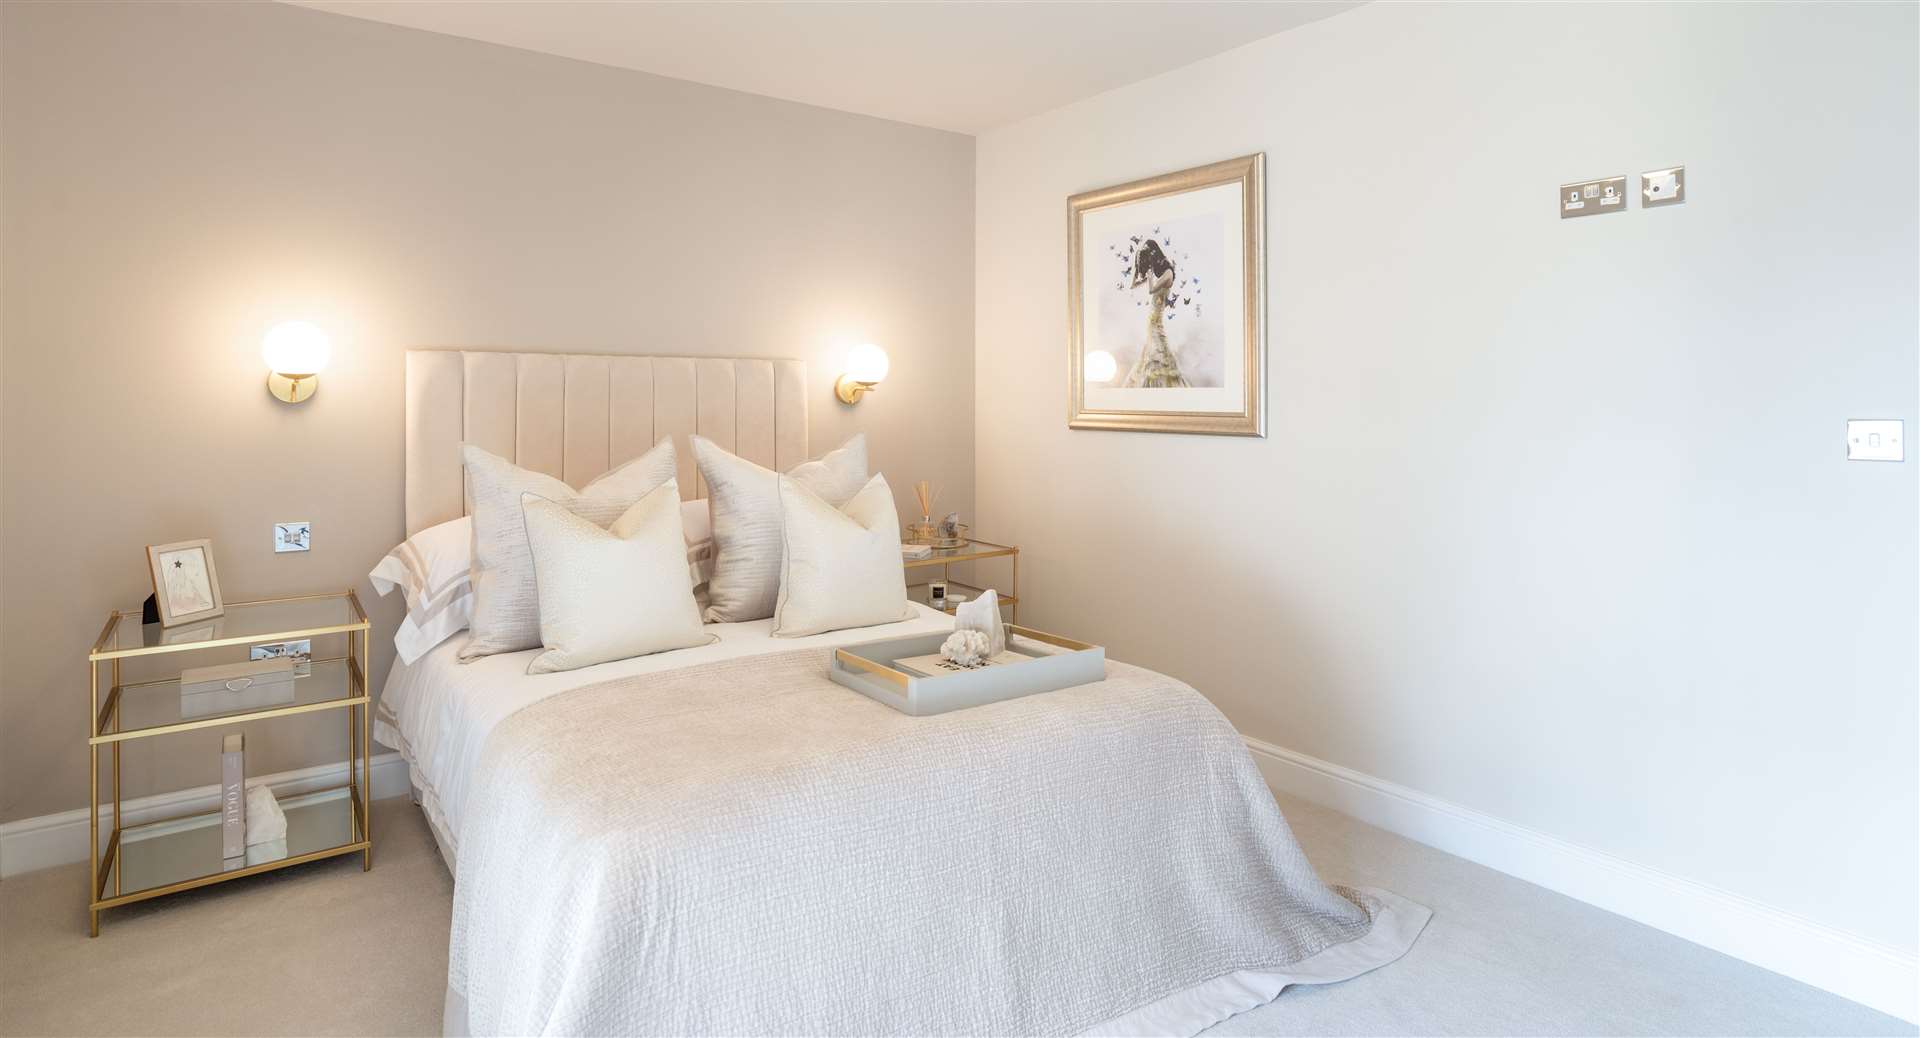 Eddington Park has a selection of stunning one, two and three-bedroom apartments